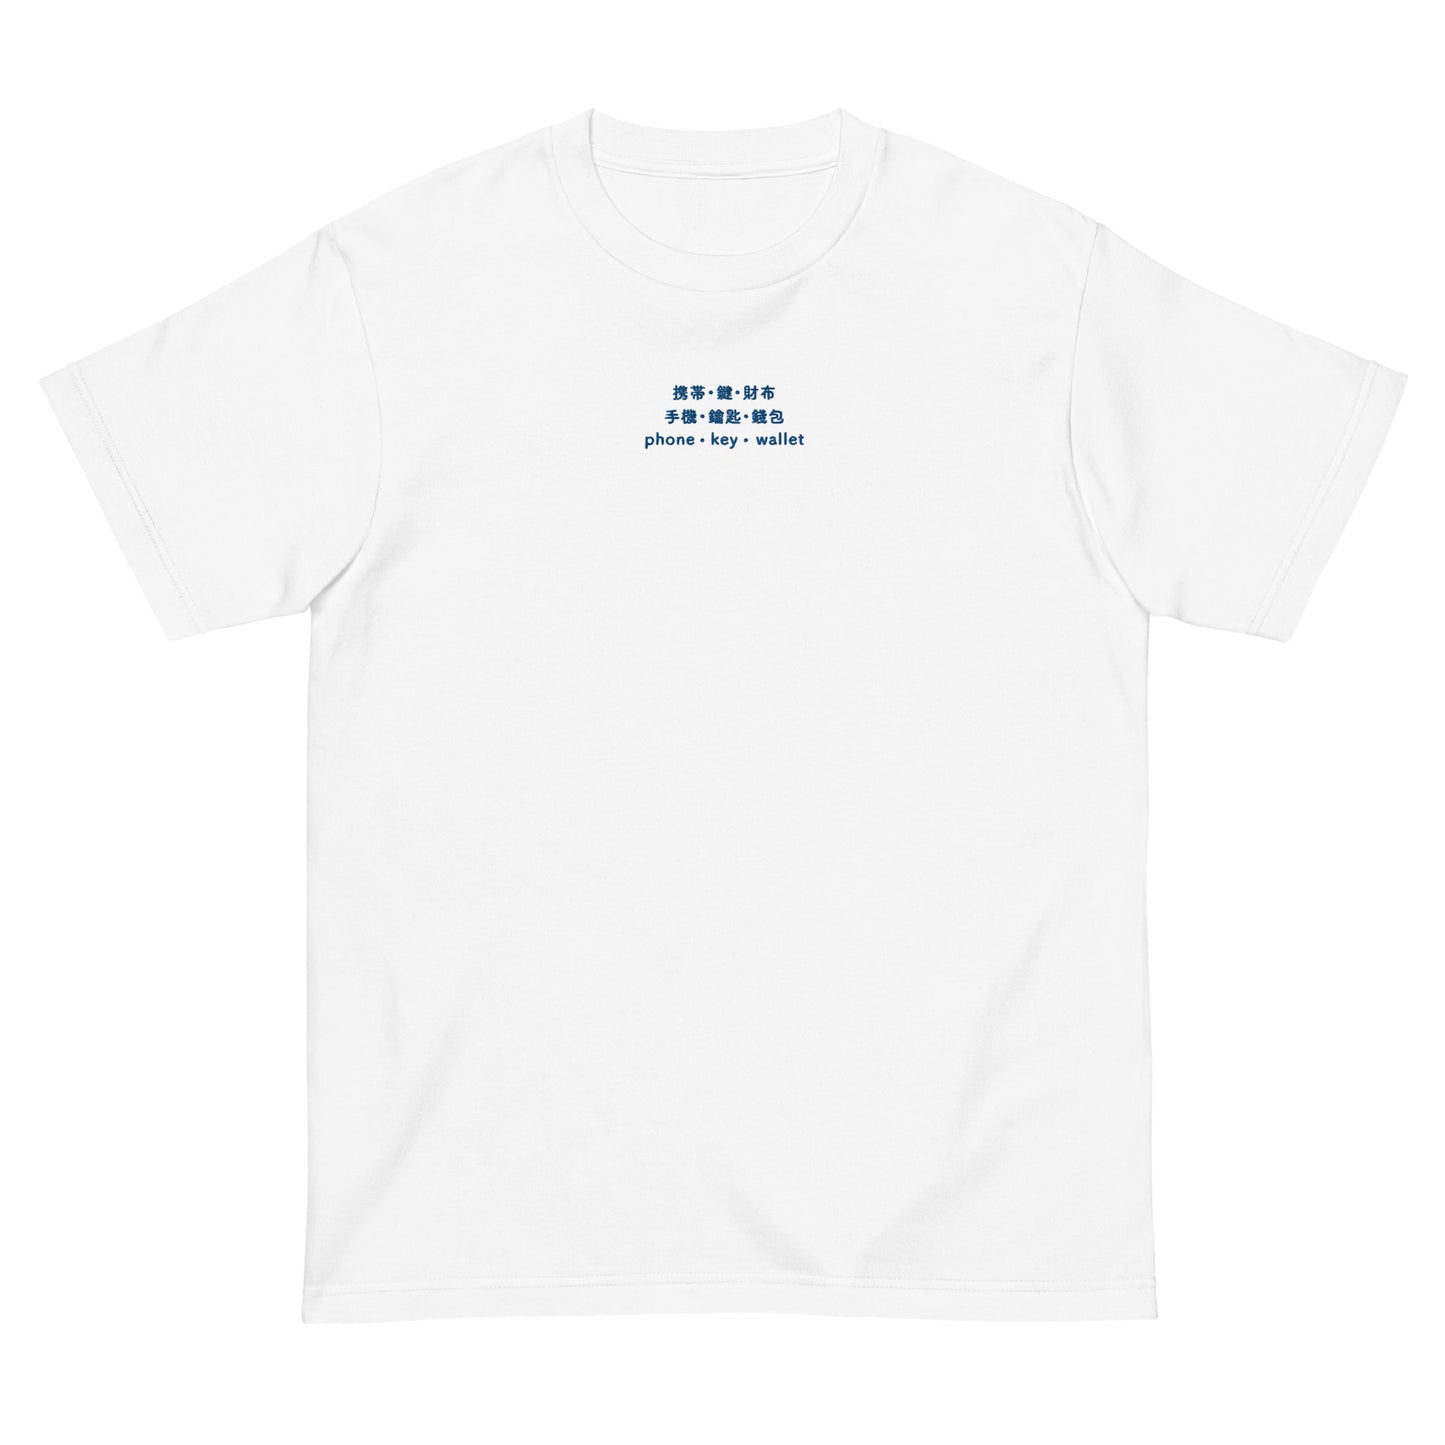 White High Quality Tee - Front Design with an Blue Embroidery "Phone/Key/Wallet" in Japanese,Chinese and English